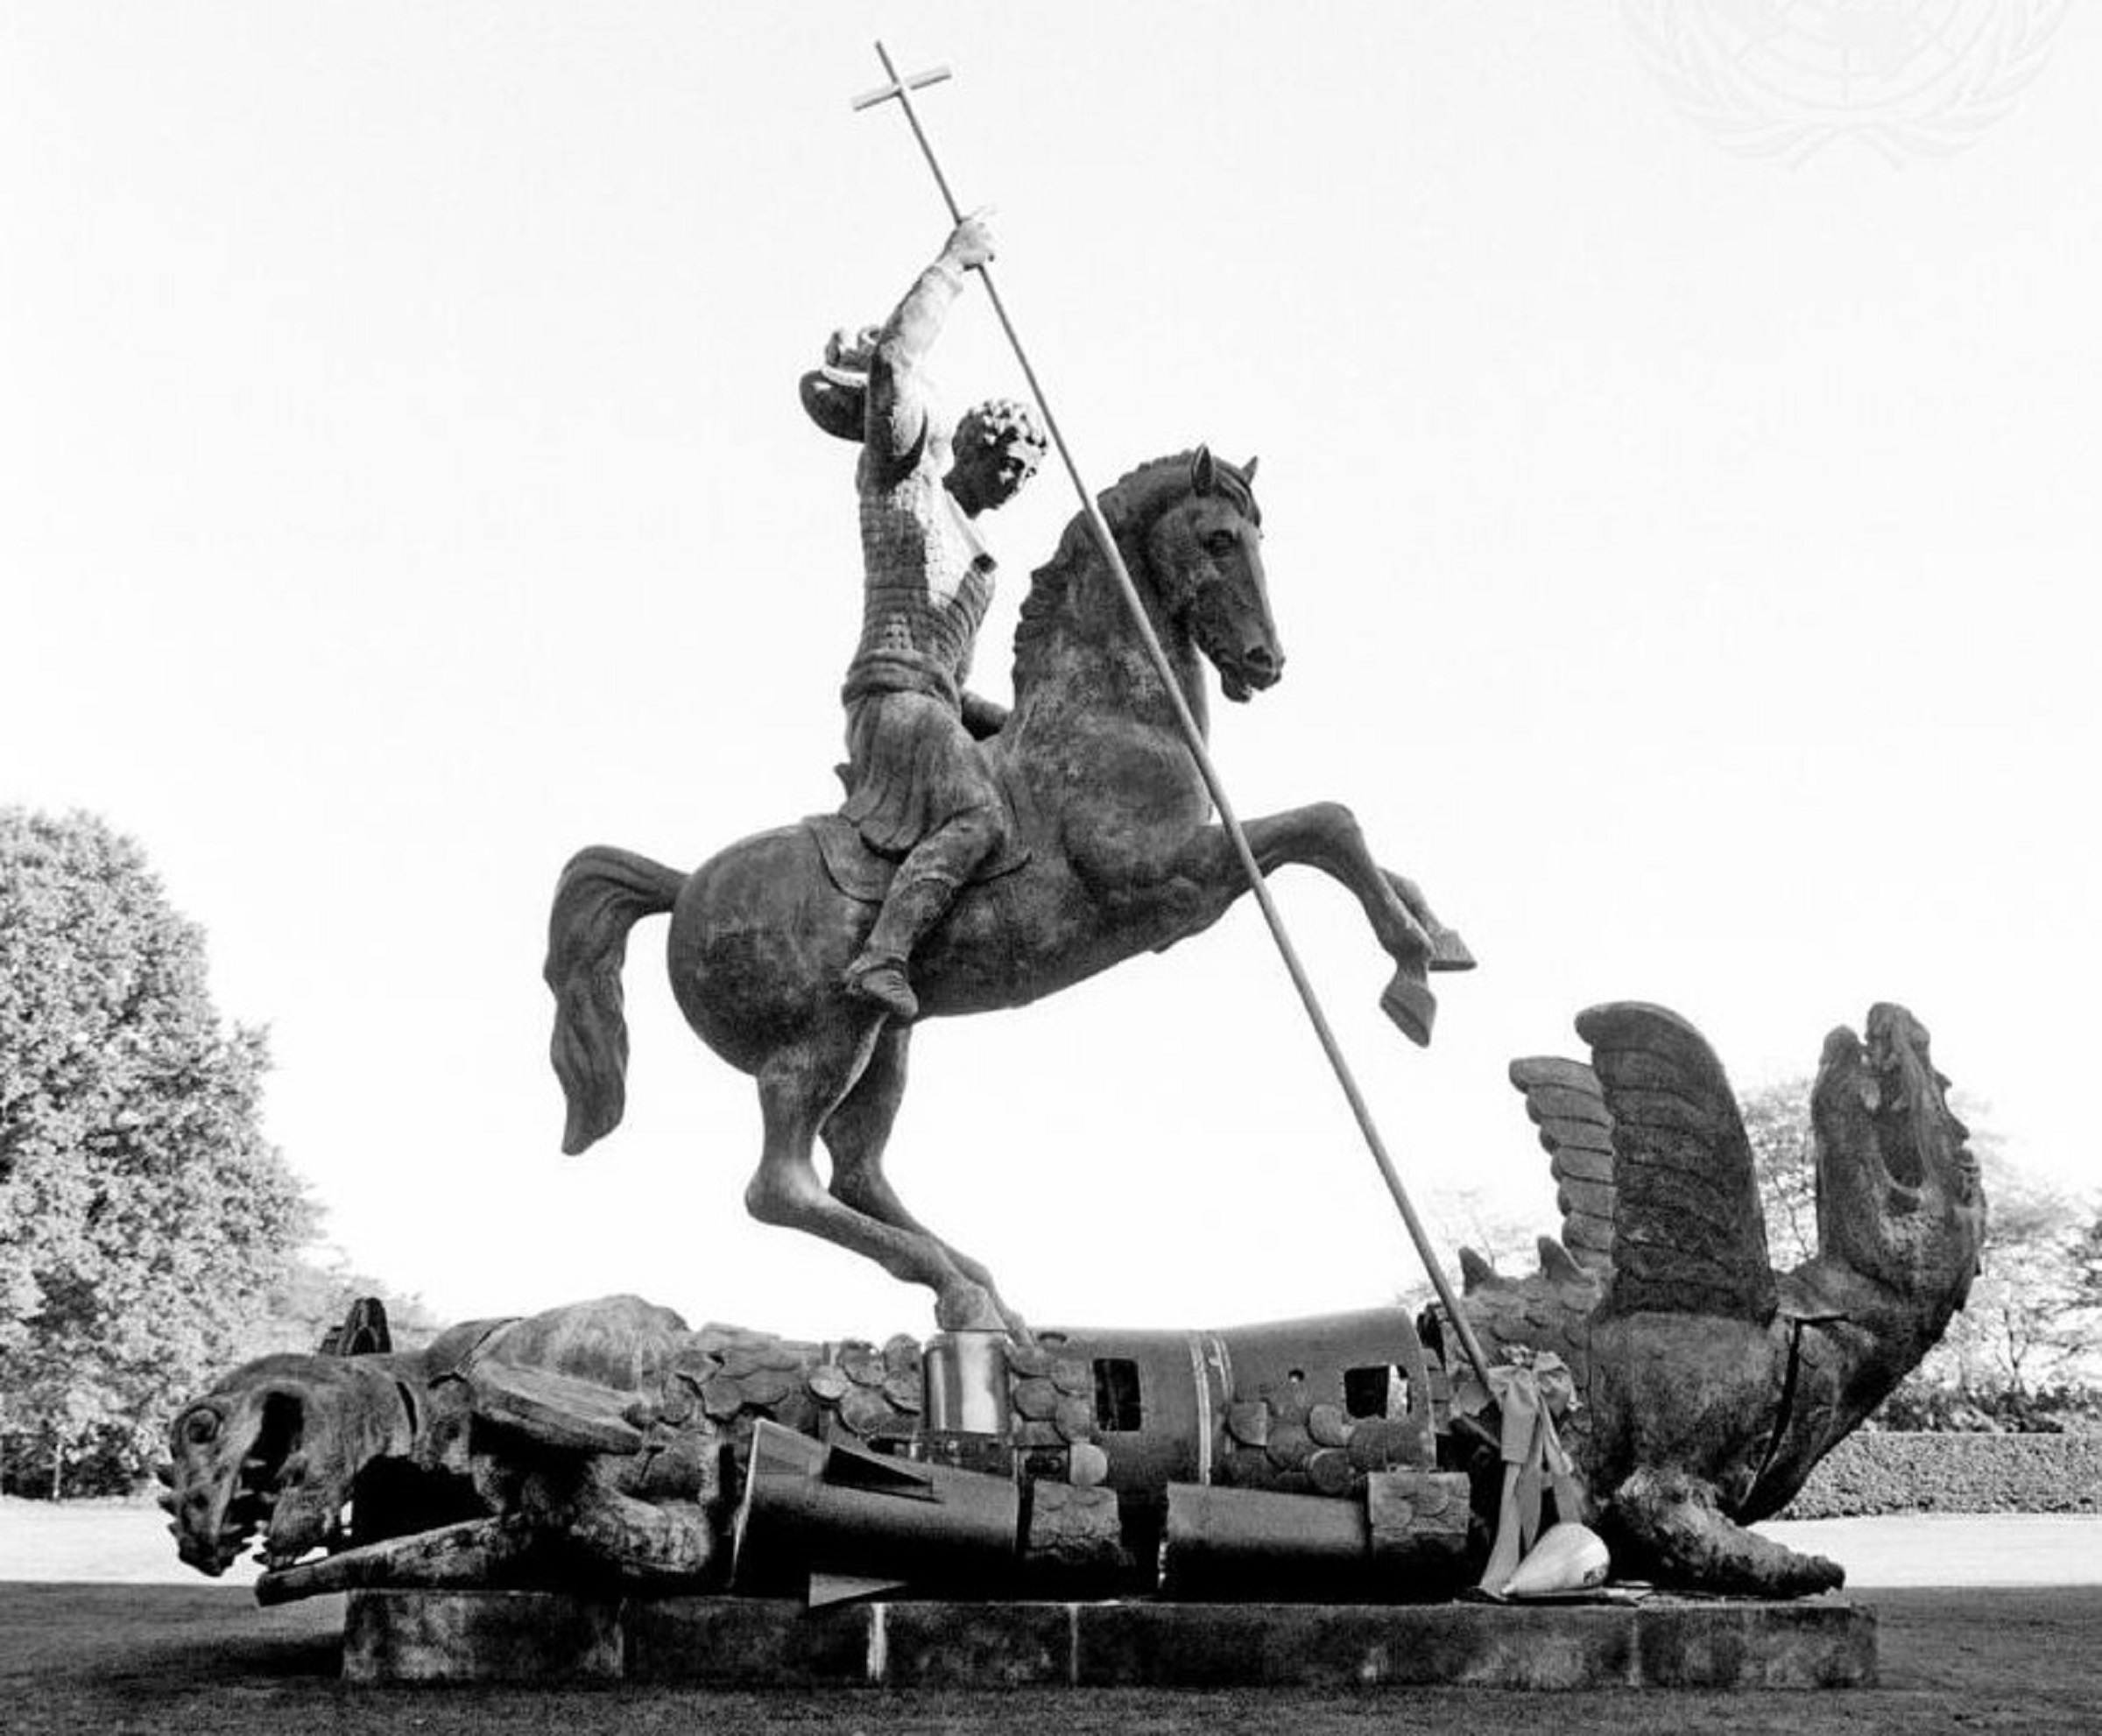 "Good Defeats Evil" depicting St. George slaying a dragon made from fragments of Soviet SS-20 and US Pershing nuclear missiles, United Nations, New York.